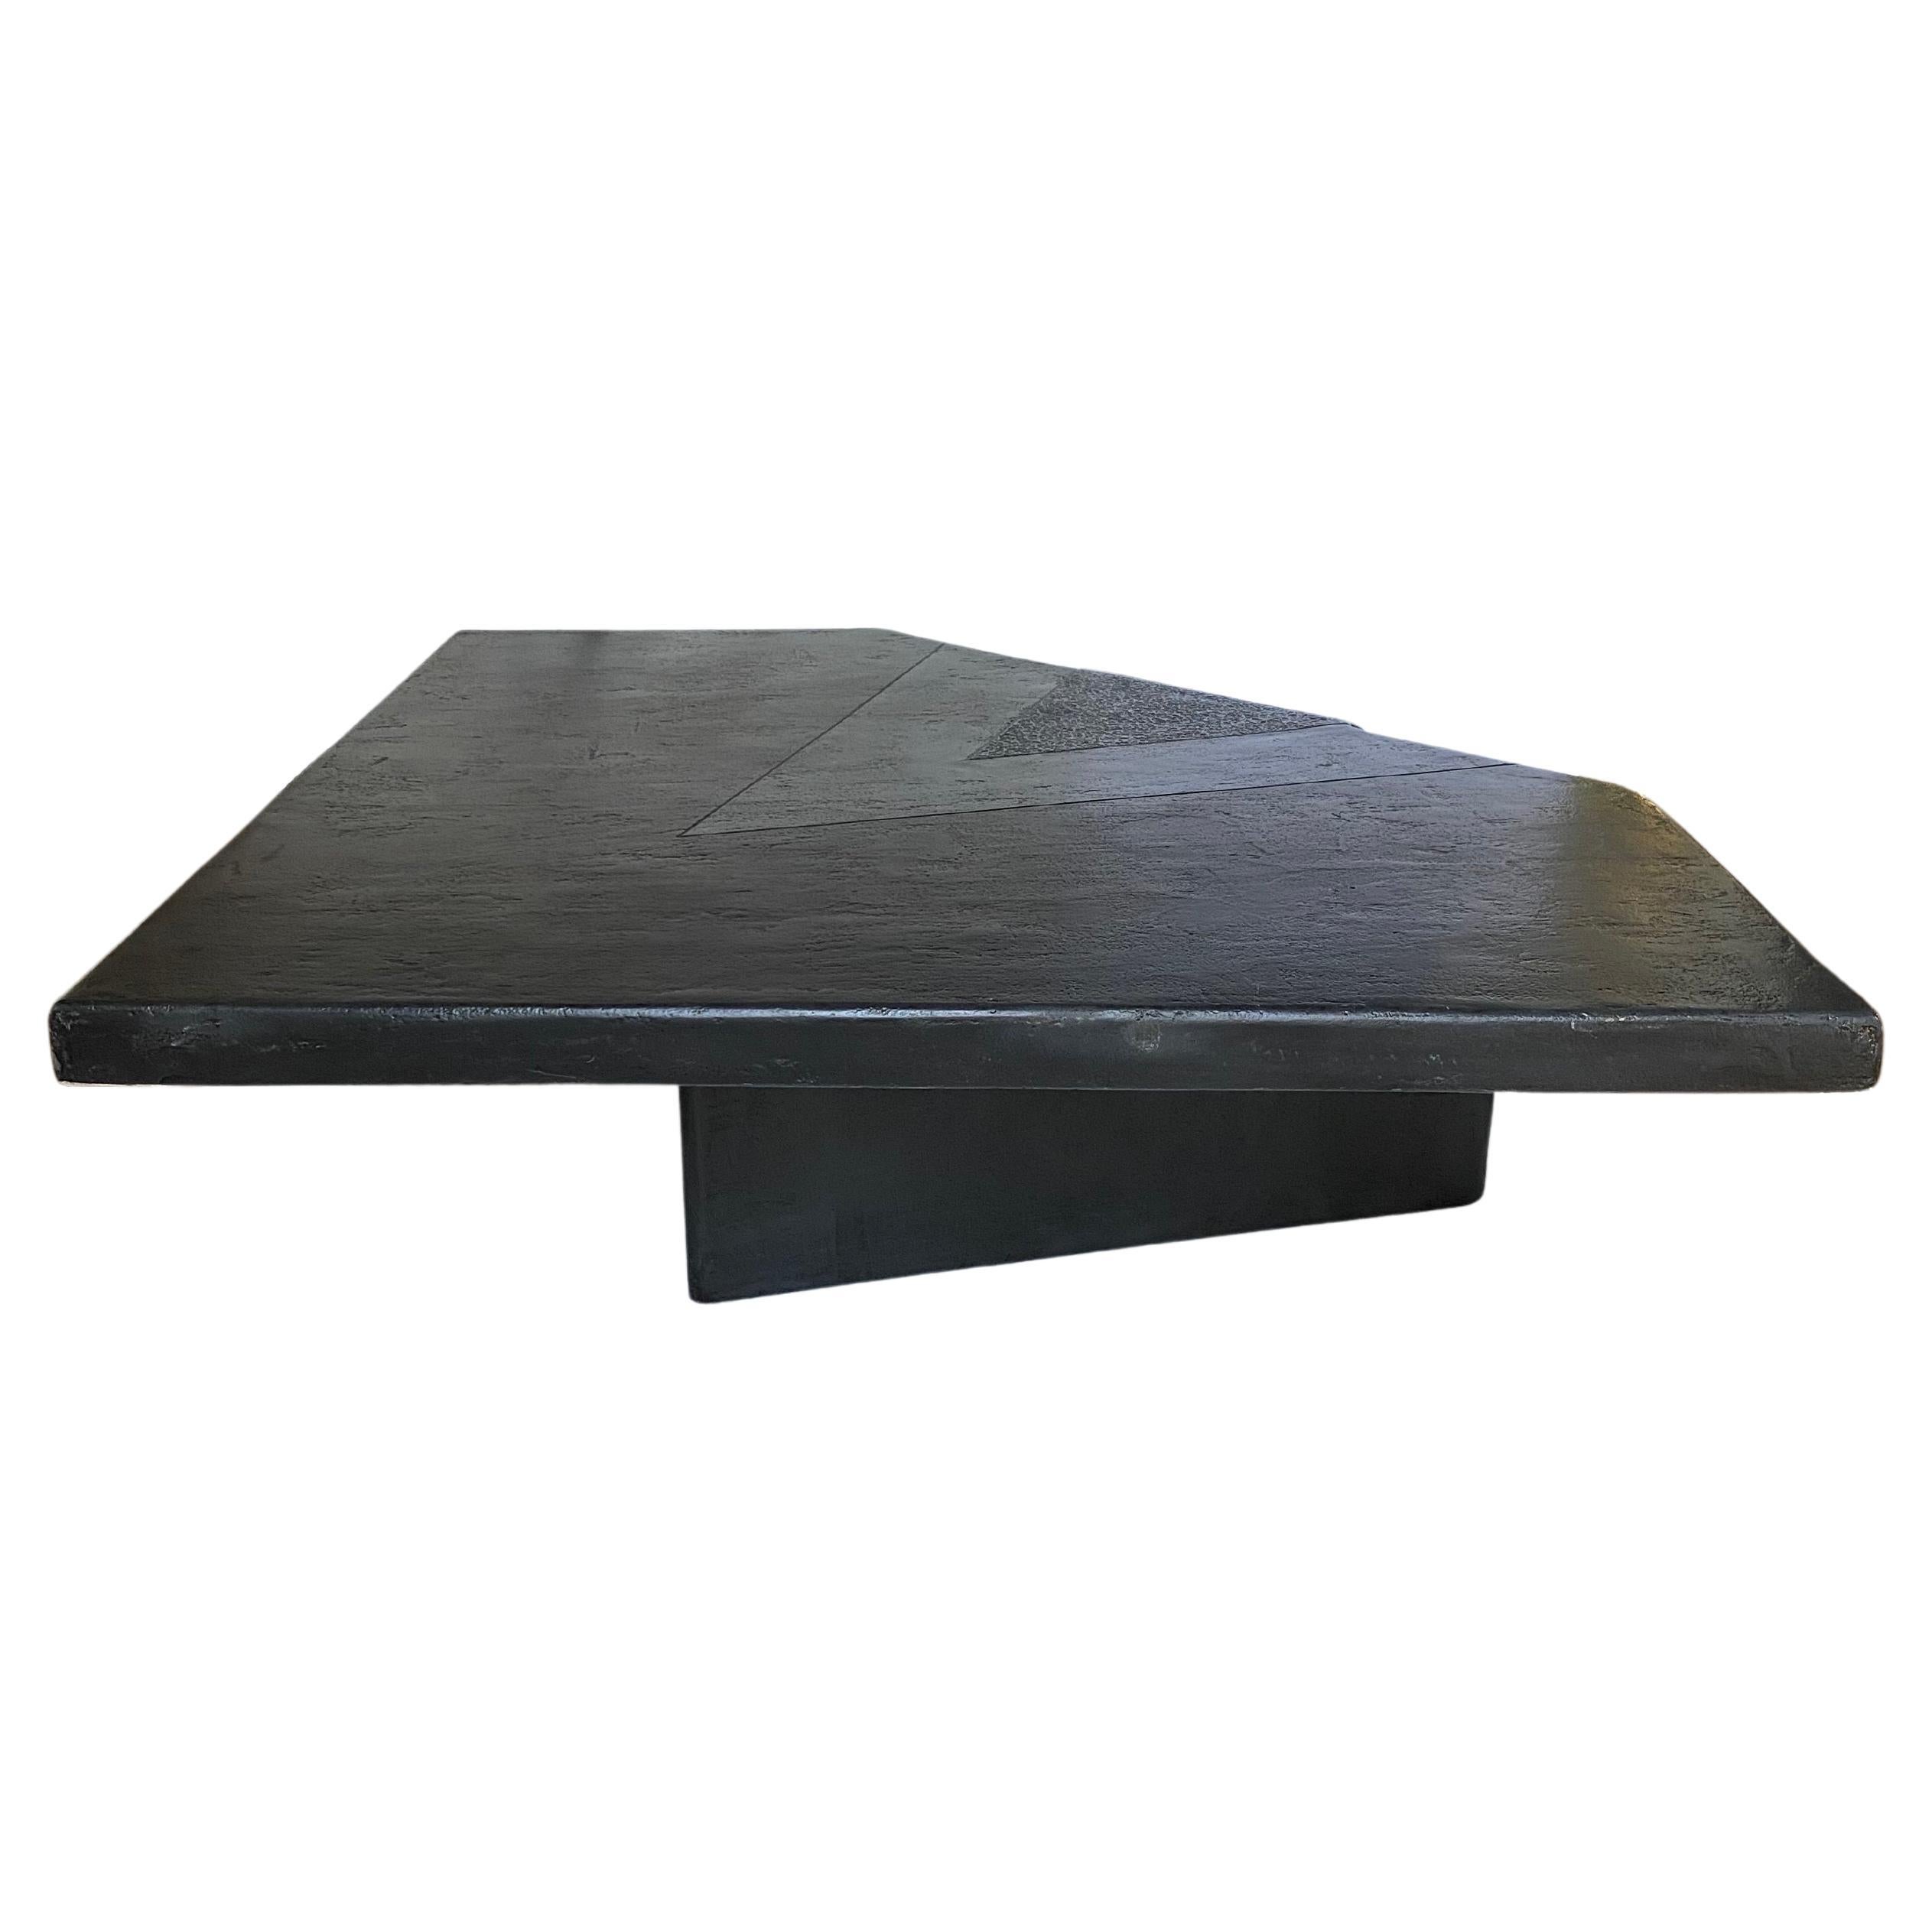 Sleek and sculptural black plaster coffee or cocktail table. Features a unique geometric, polygon, triangular shaped top on a cantilevered base with dramatic waterfall effect on one corner of table. Colors are black, grey and charcoal. The table’s